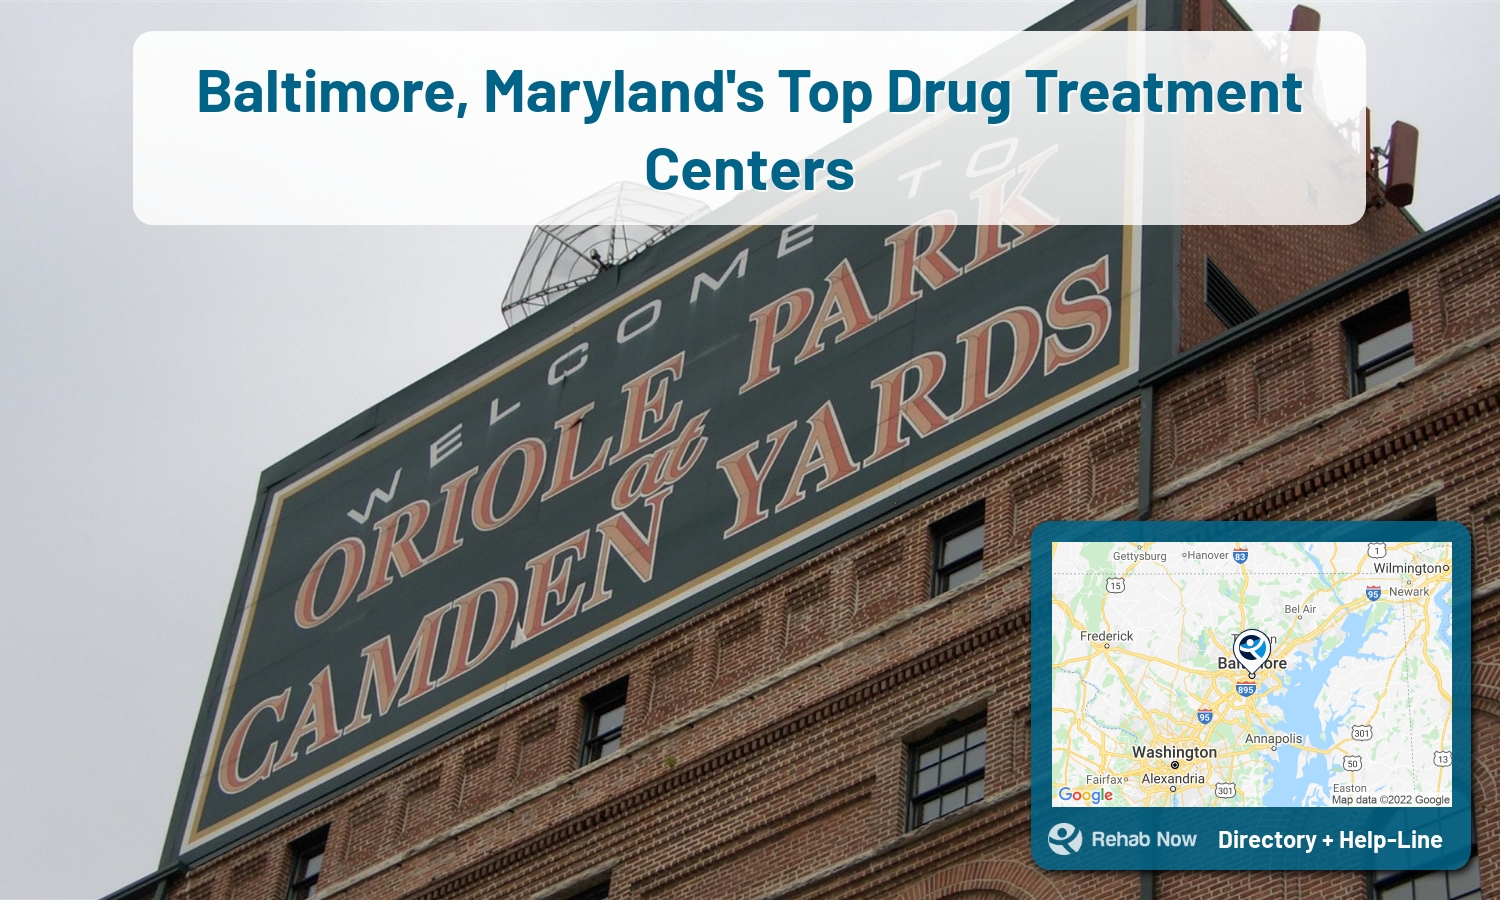 Ready to pick a rehab center in Baltimore? Get off alcohol, opiates, and other drugs, by selecting top drug rehab centers in Maryland.